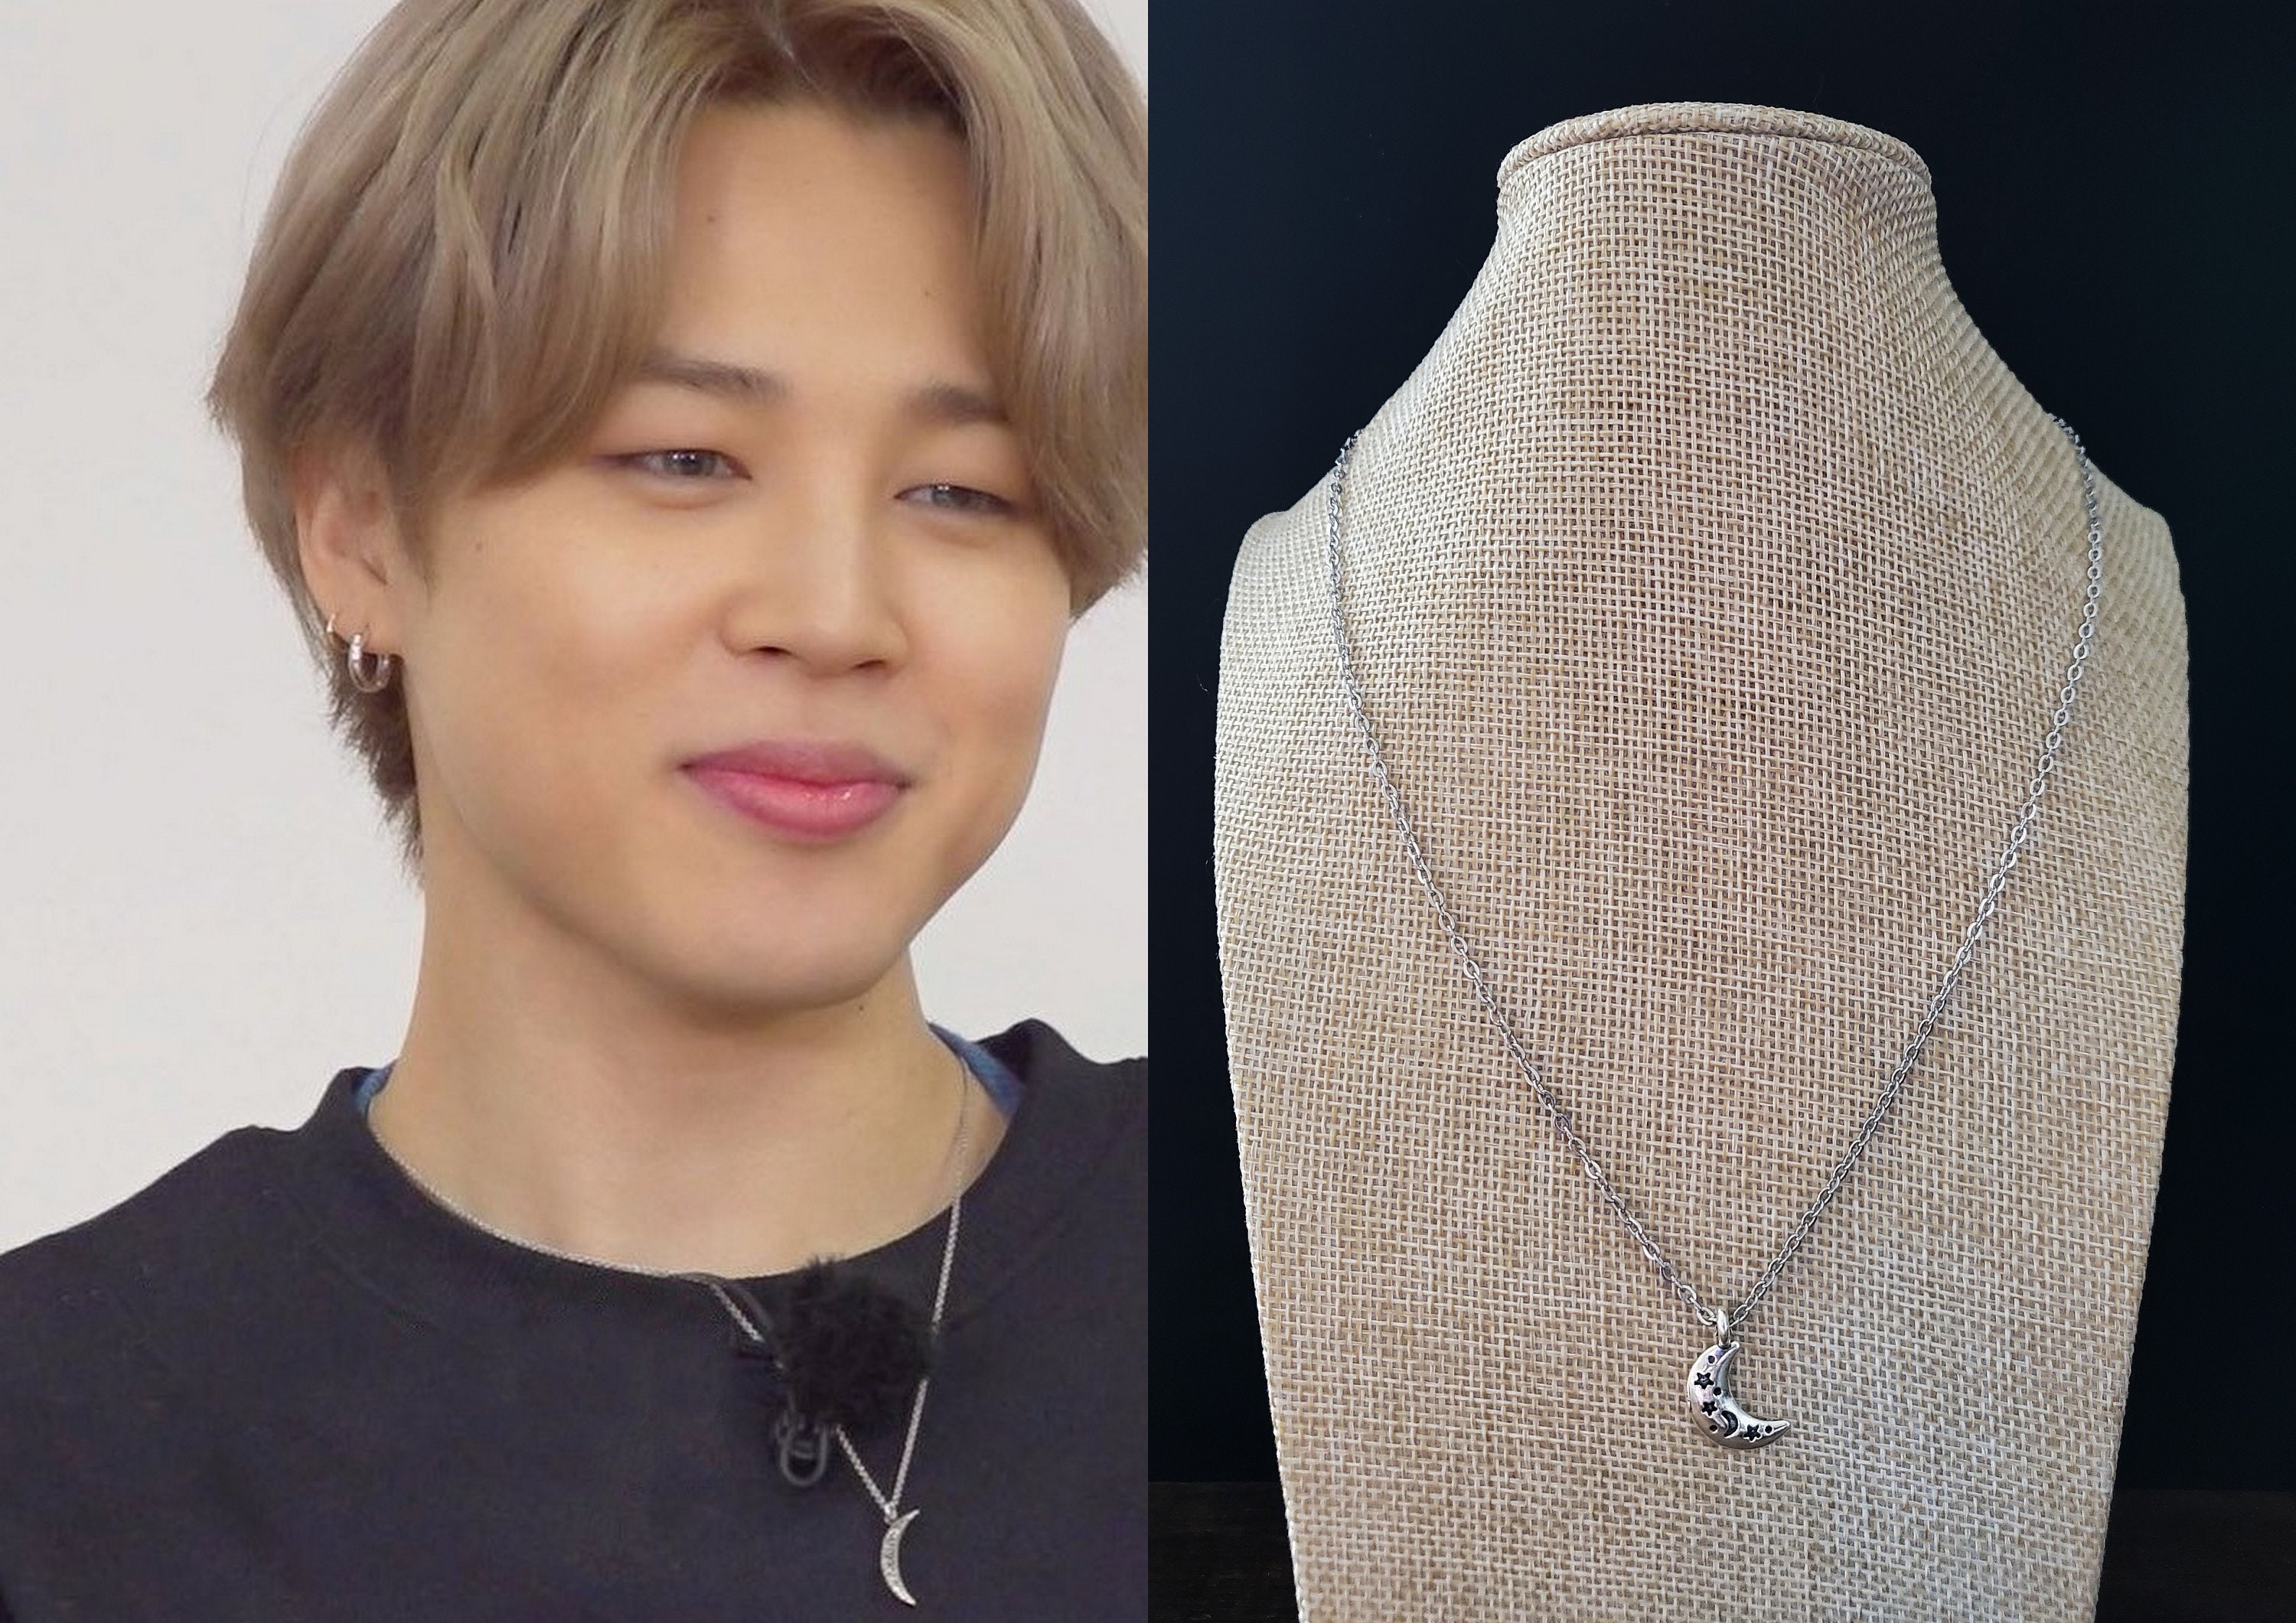 [Used Chanel Necklace] Chanel Stone Necklace Black Bts Jimin